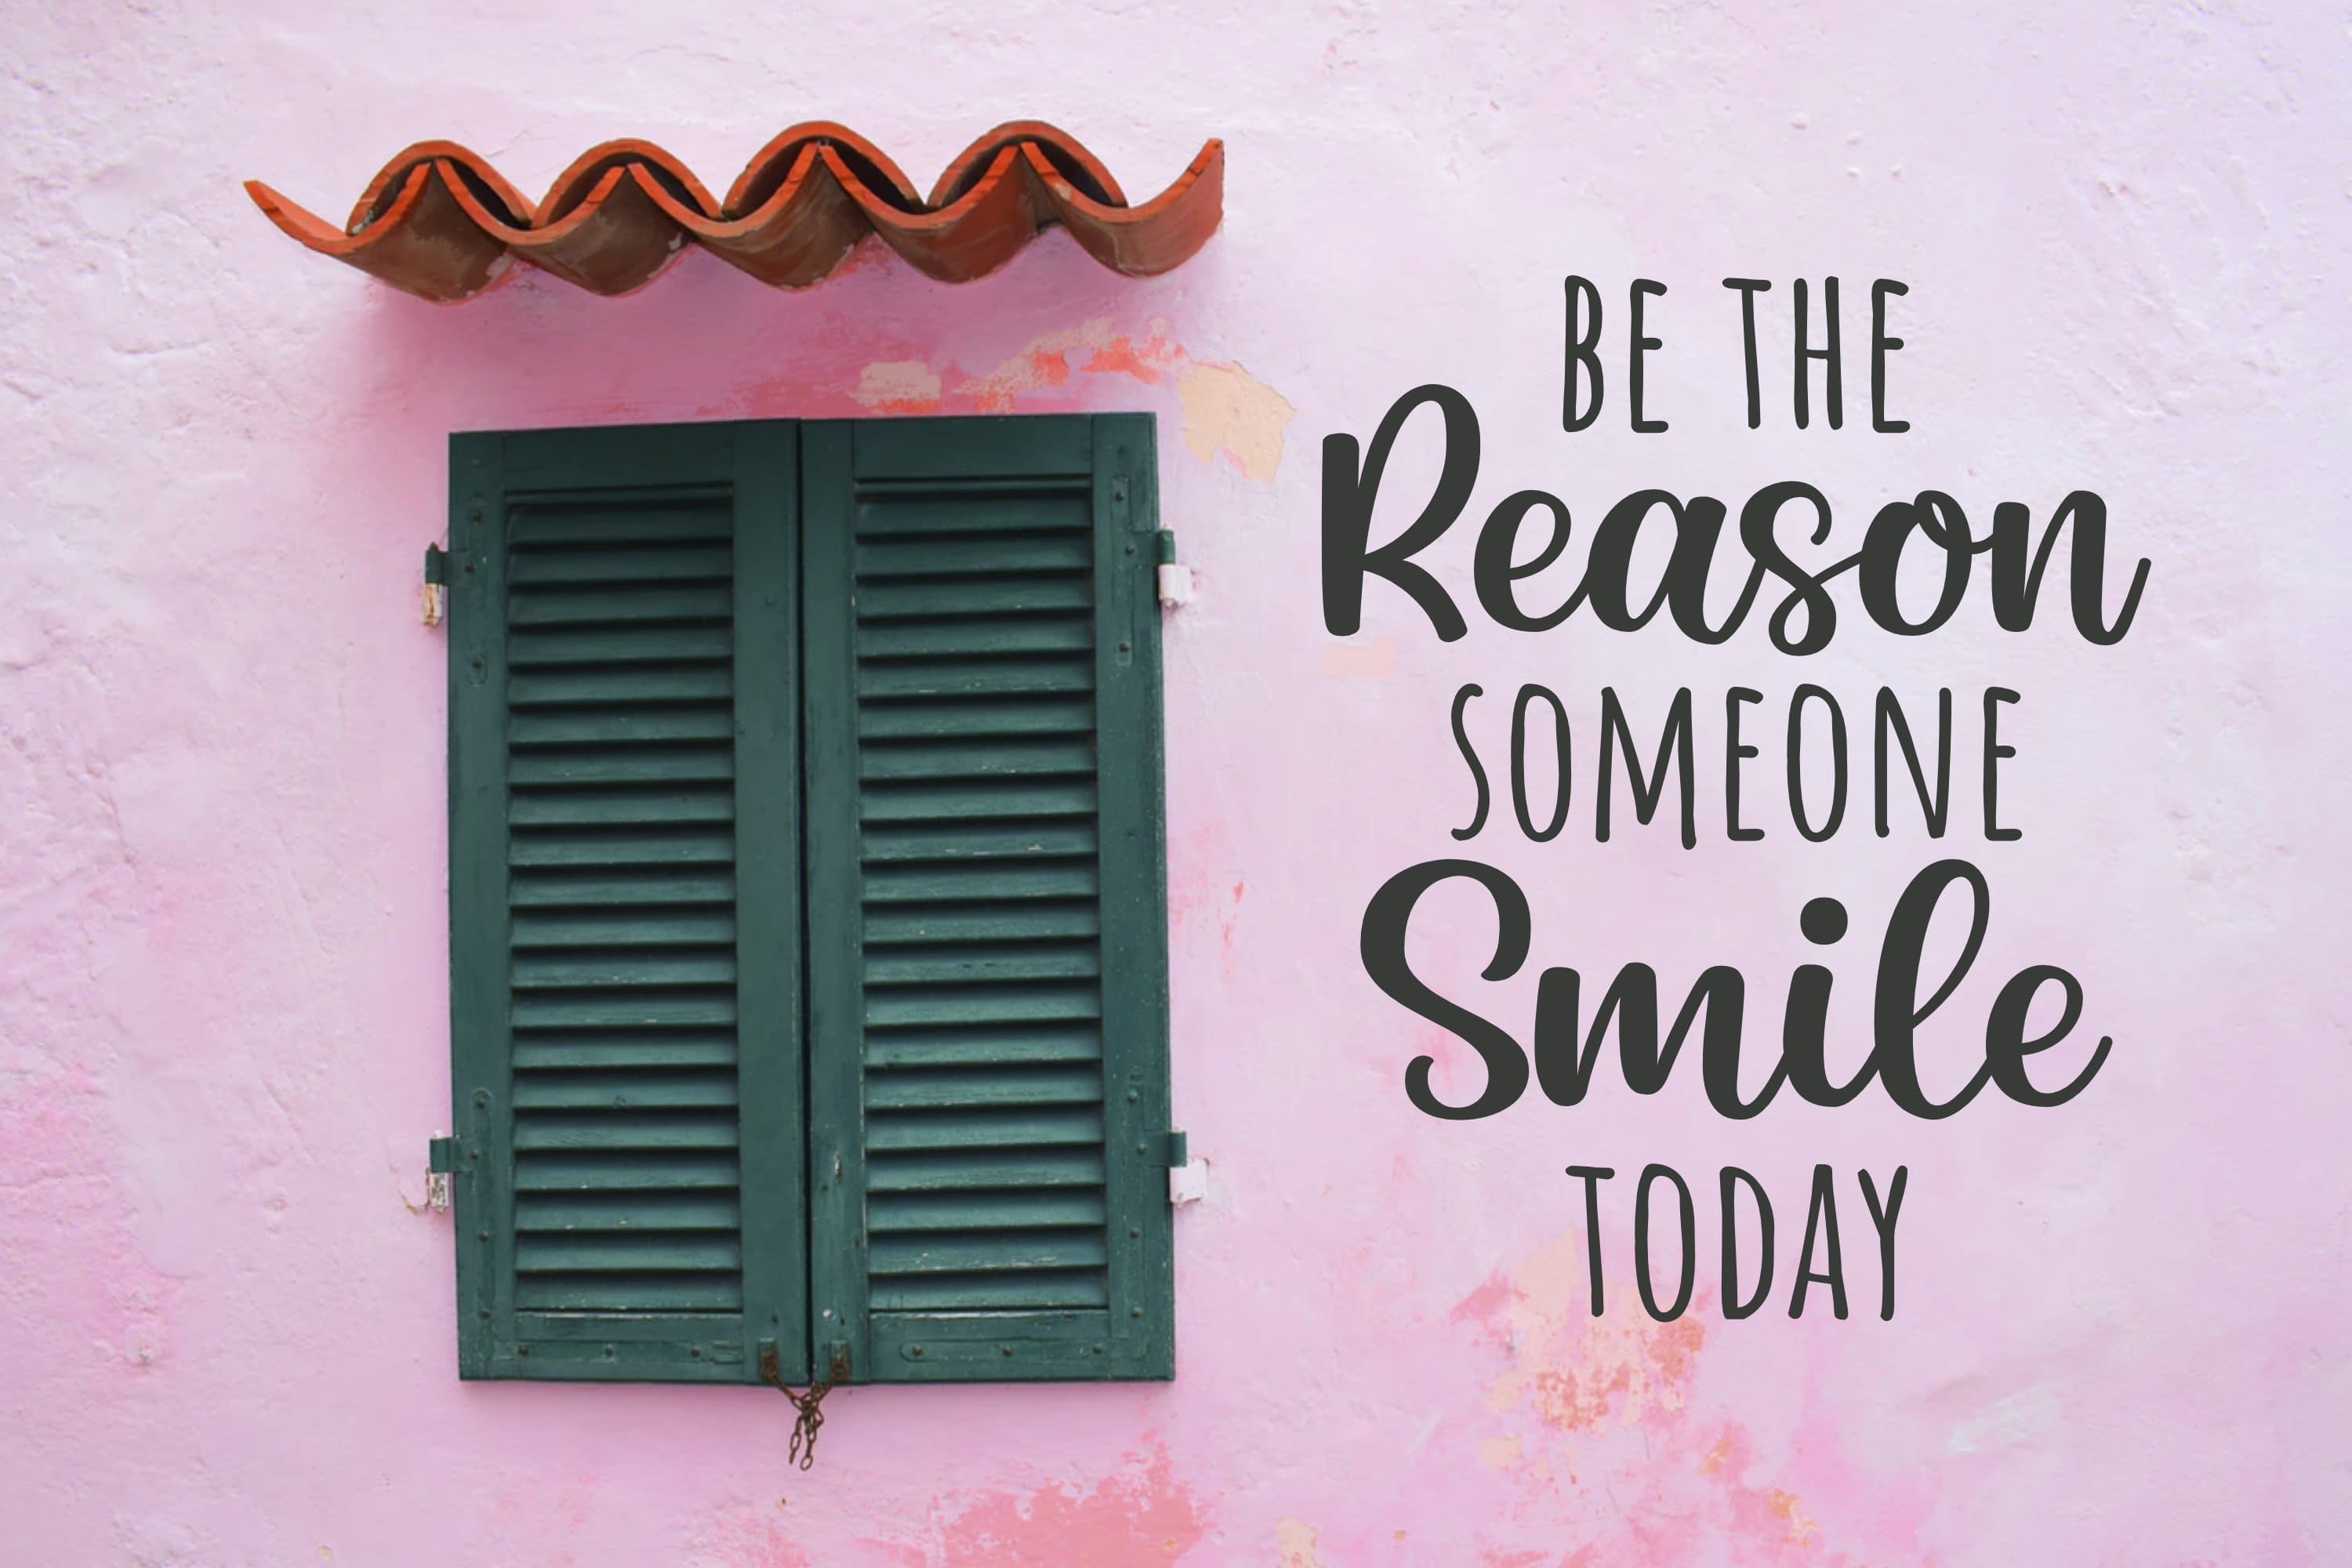 Green shutters on the background of a pink wall and the inscription "Be the Reason Someone Smile Today".